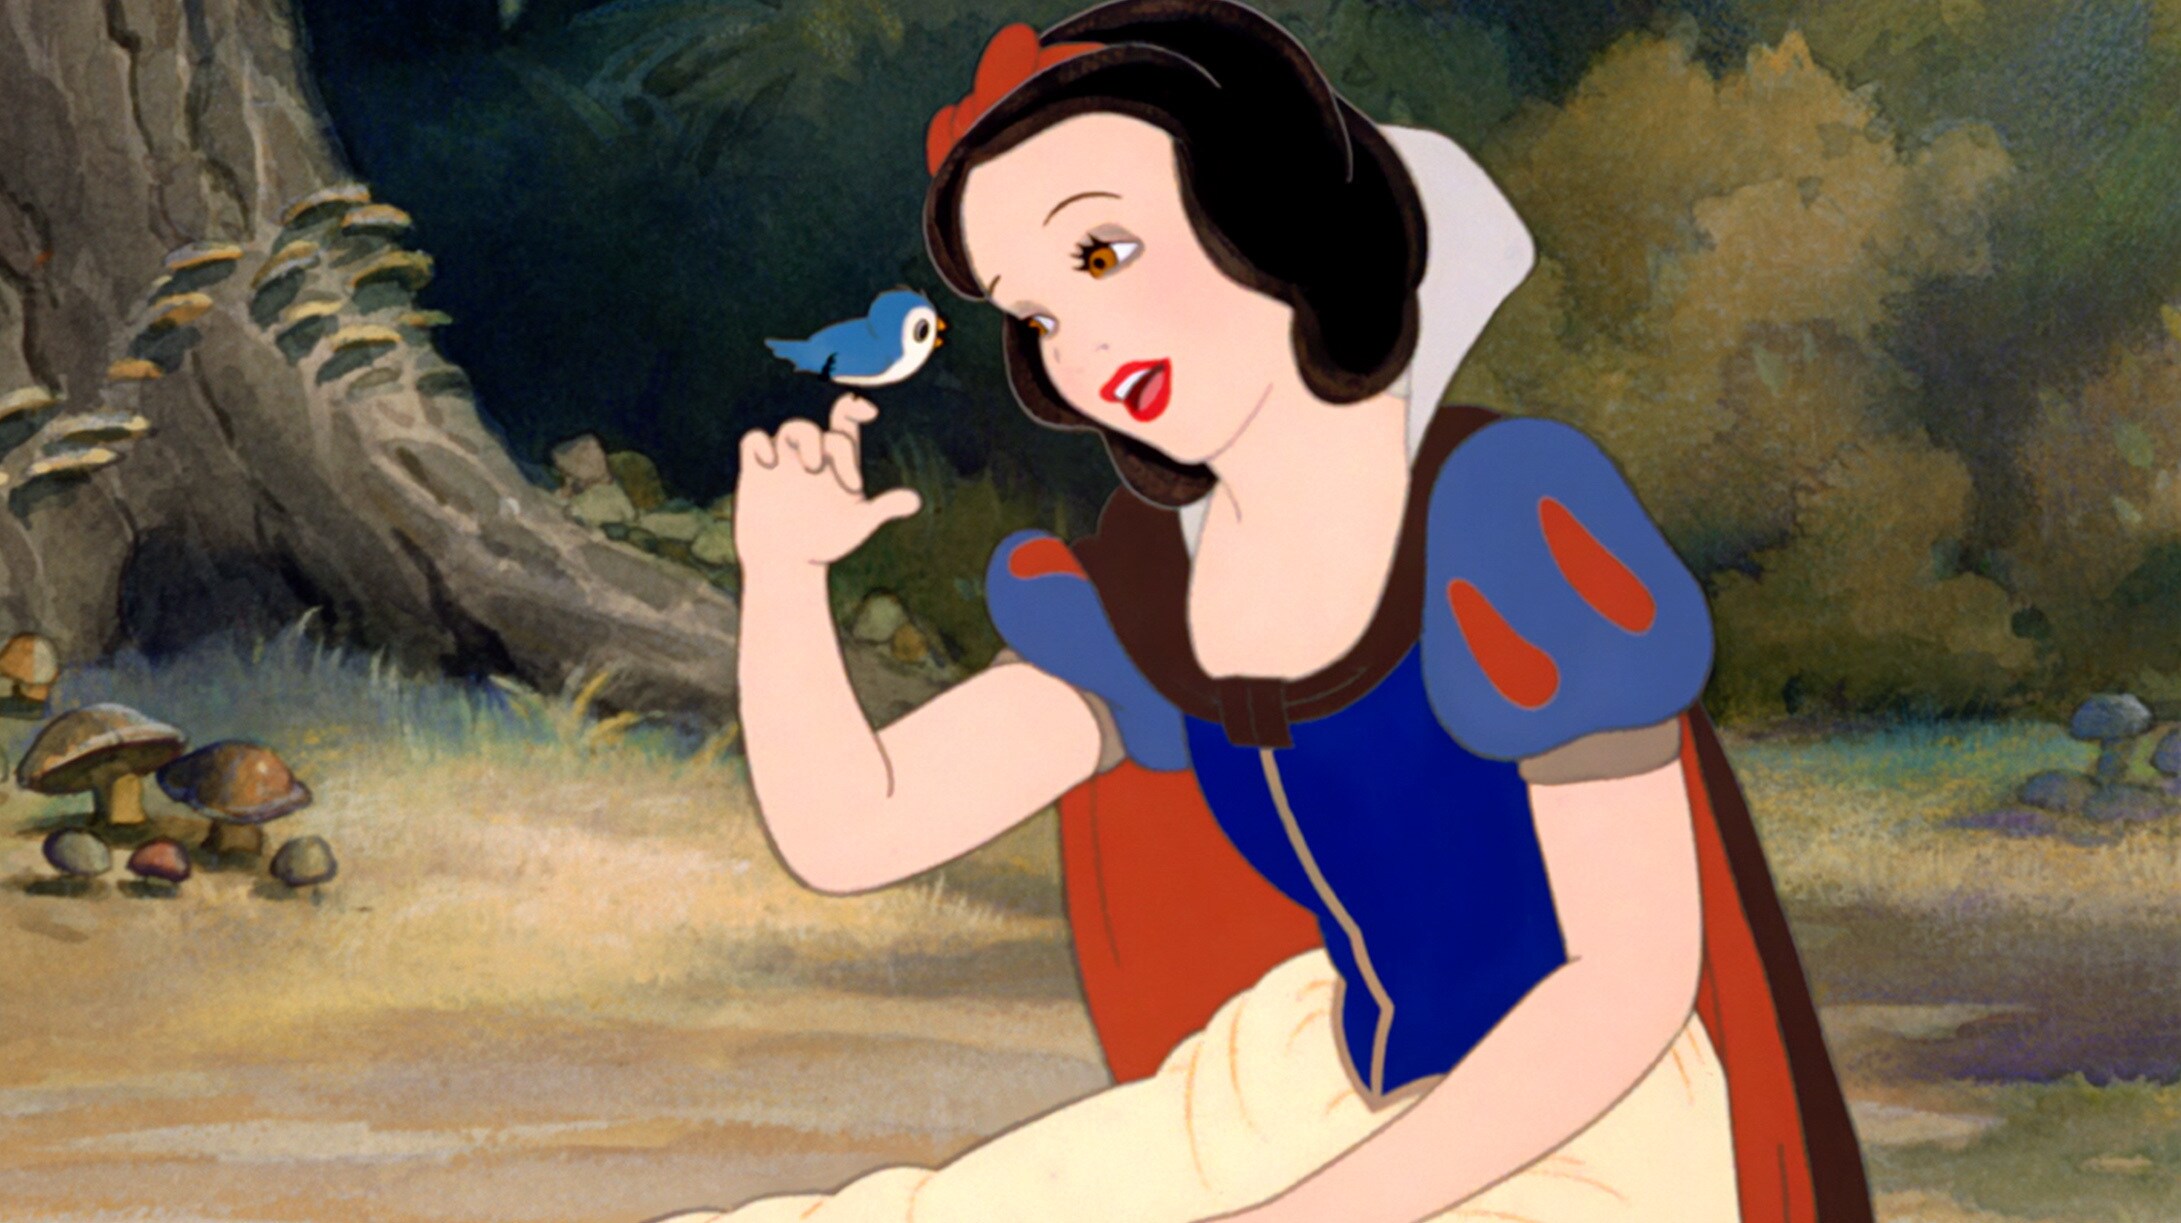 Snow White singing to a bird in the forest. 